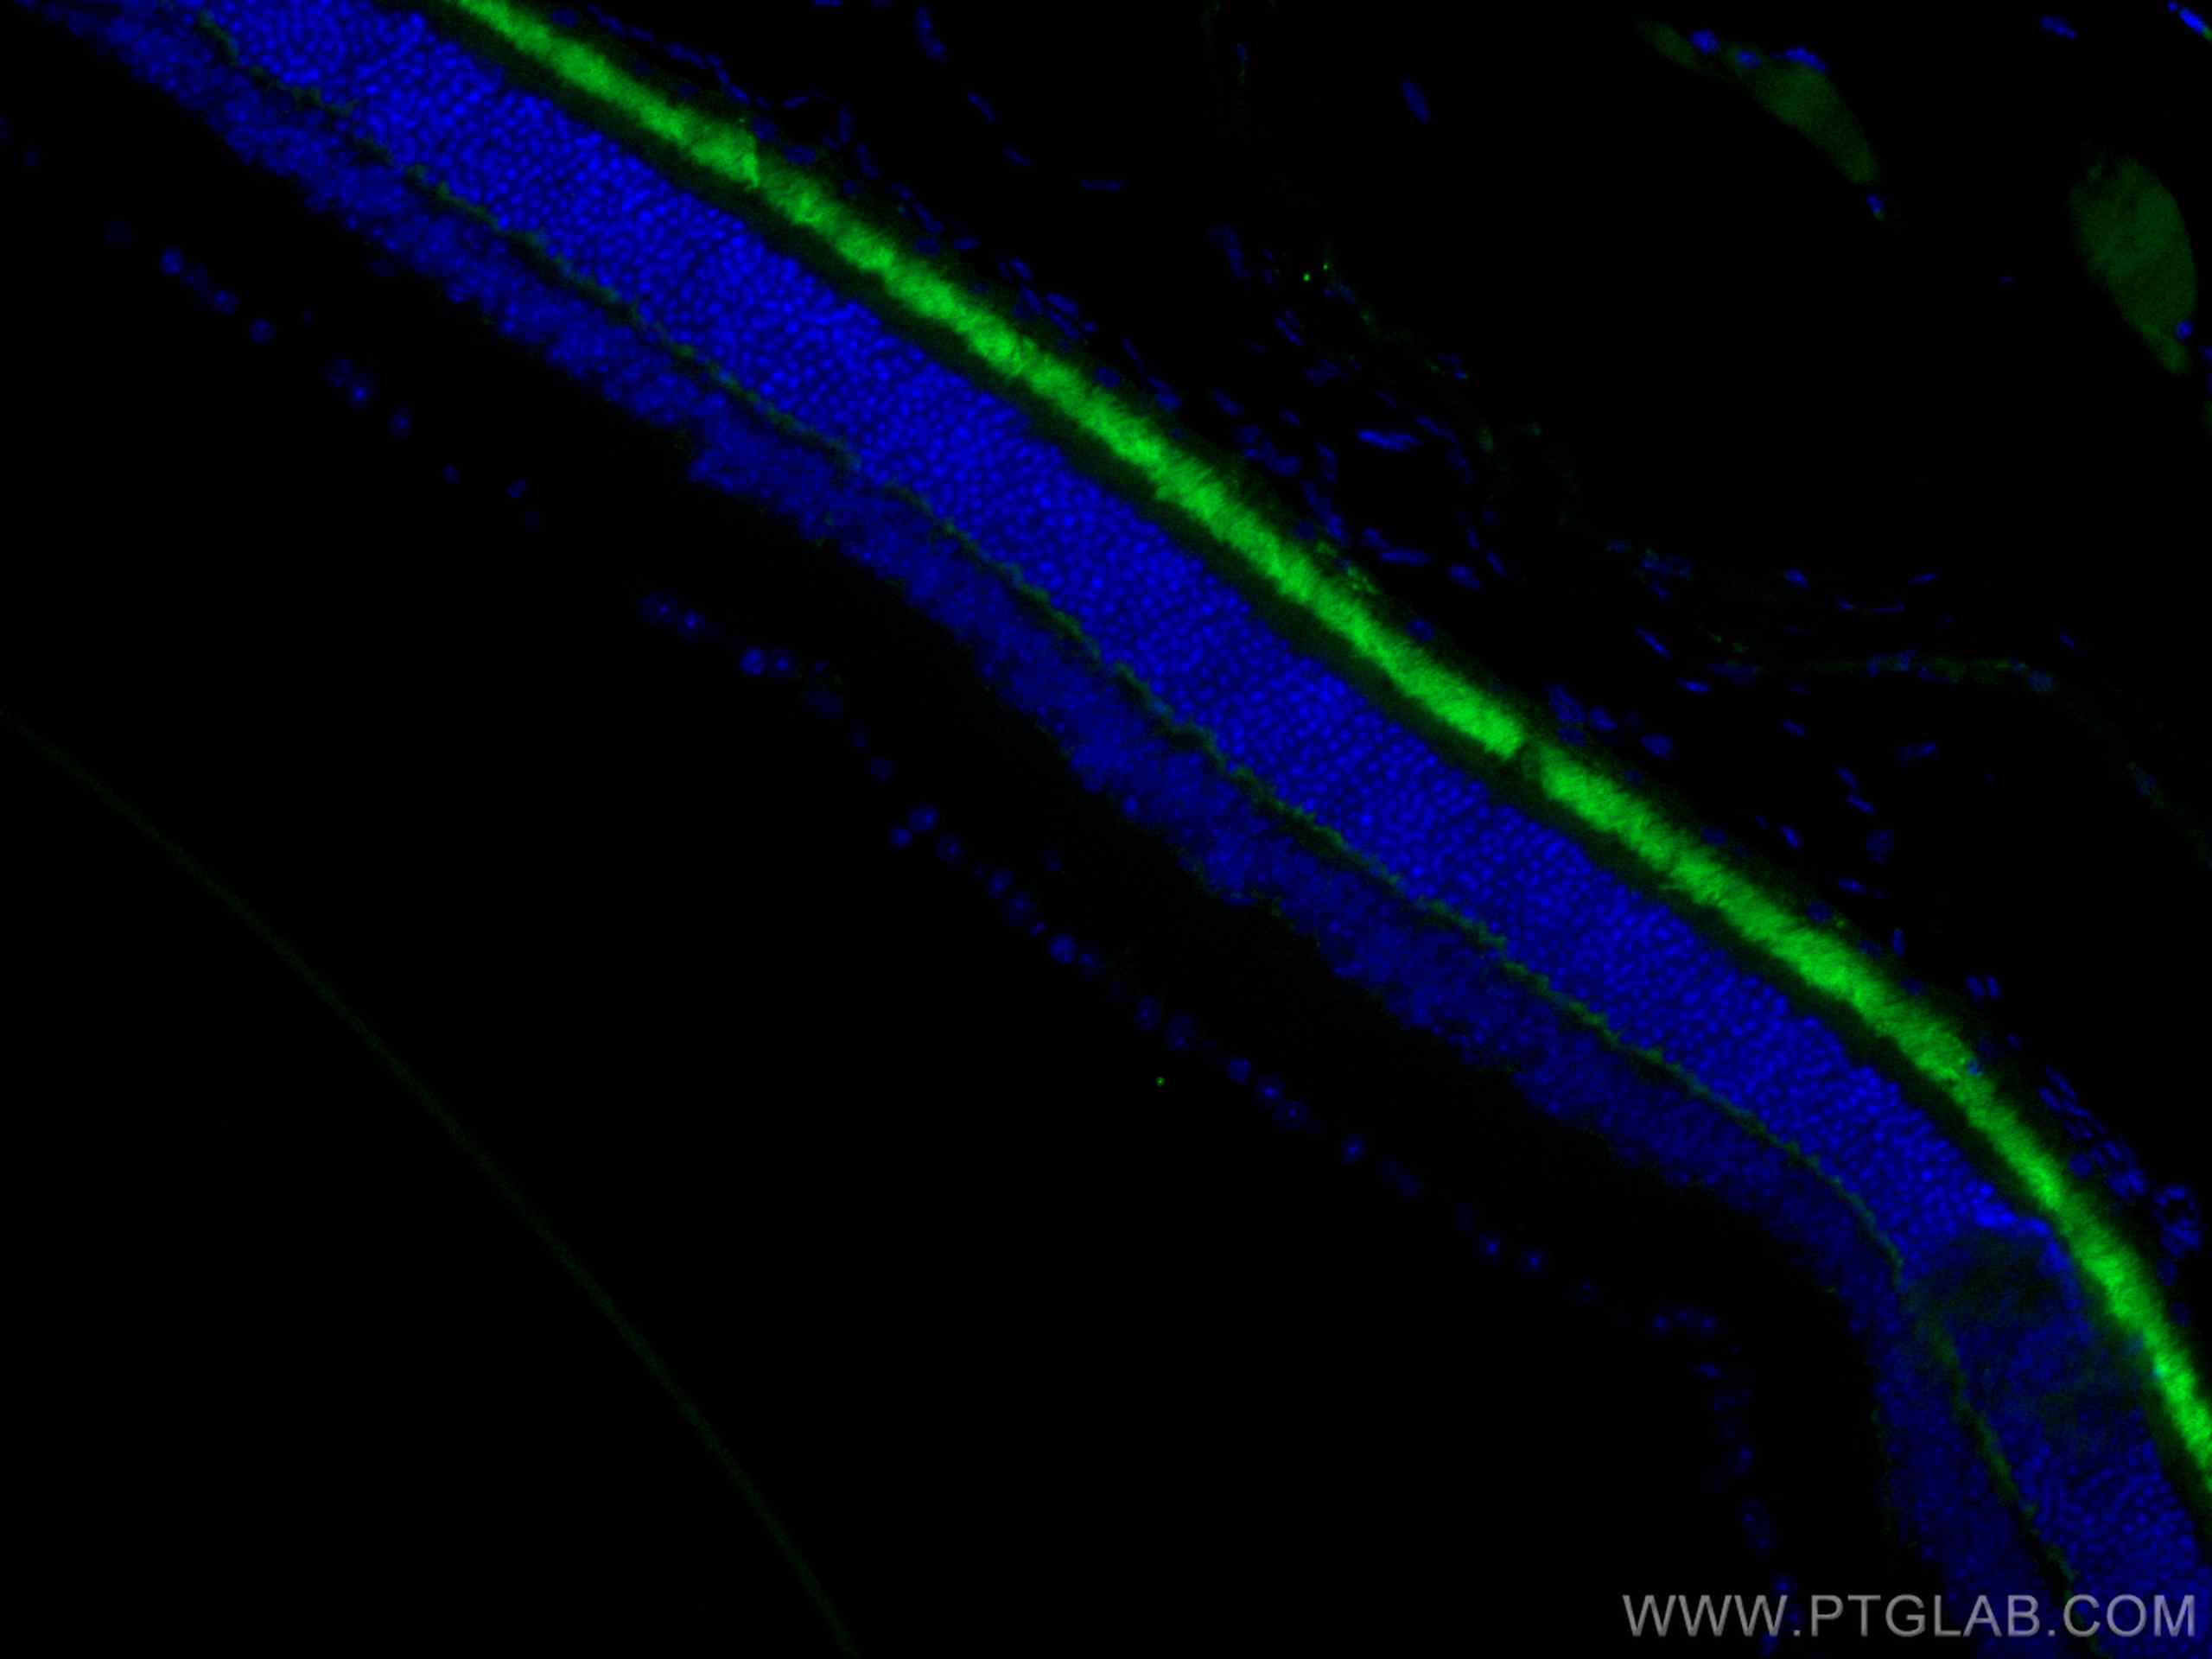 IF Staining of mouse eye using CL488-67638